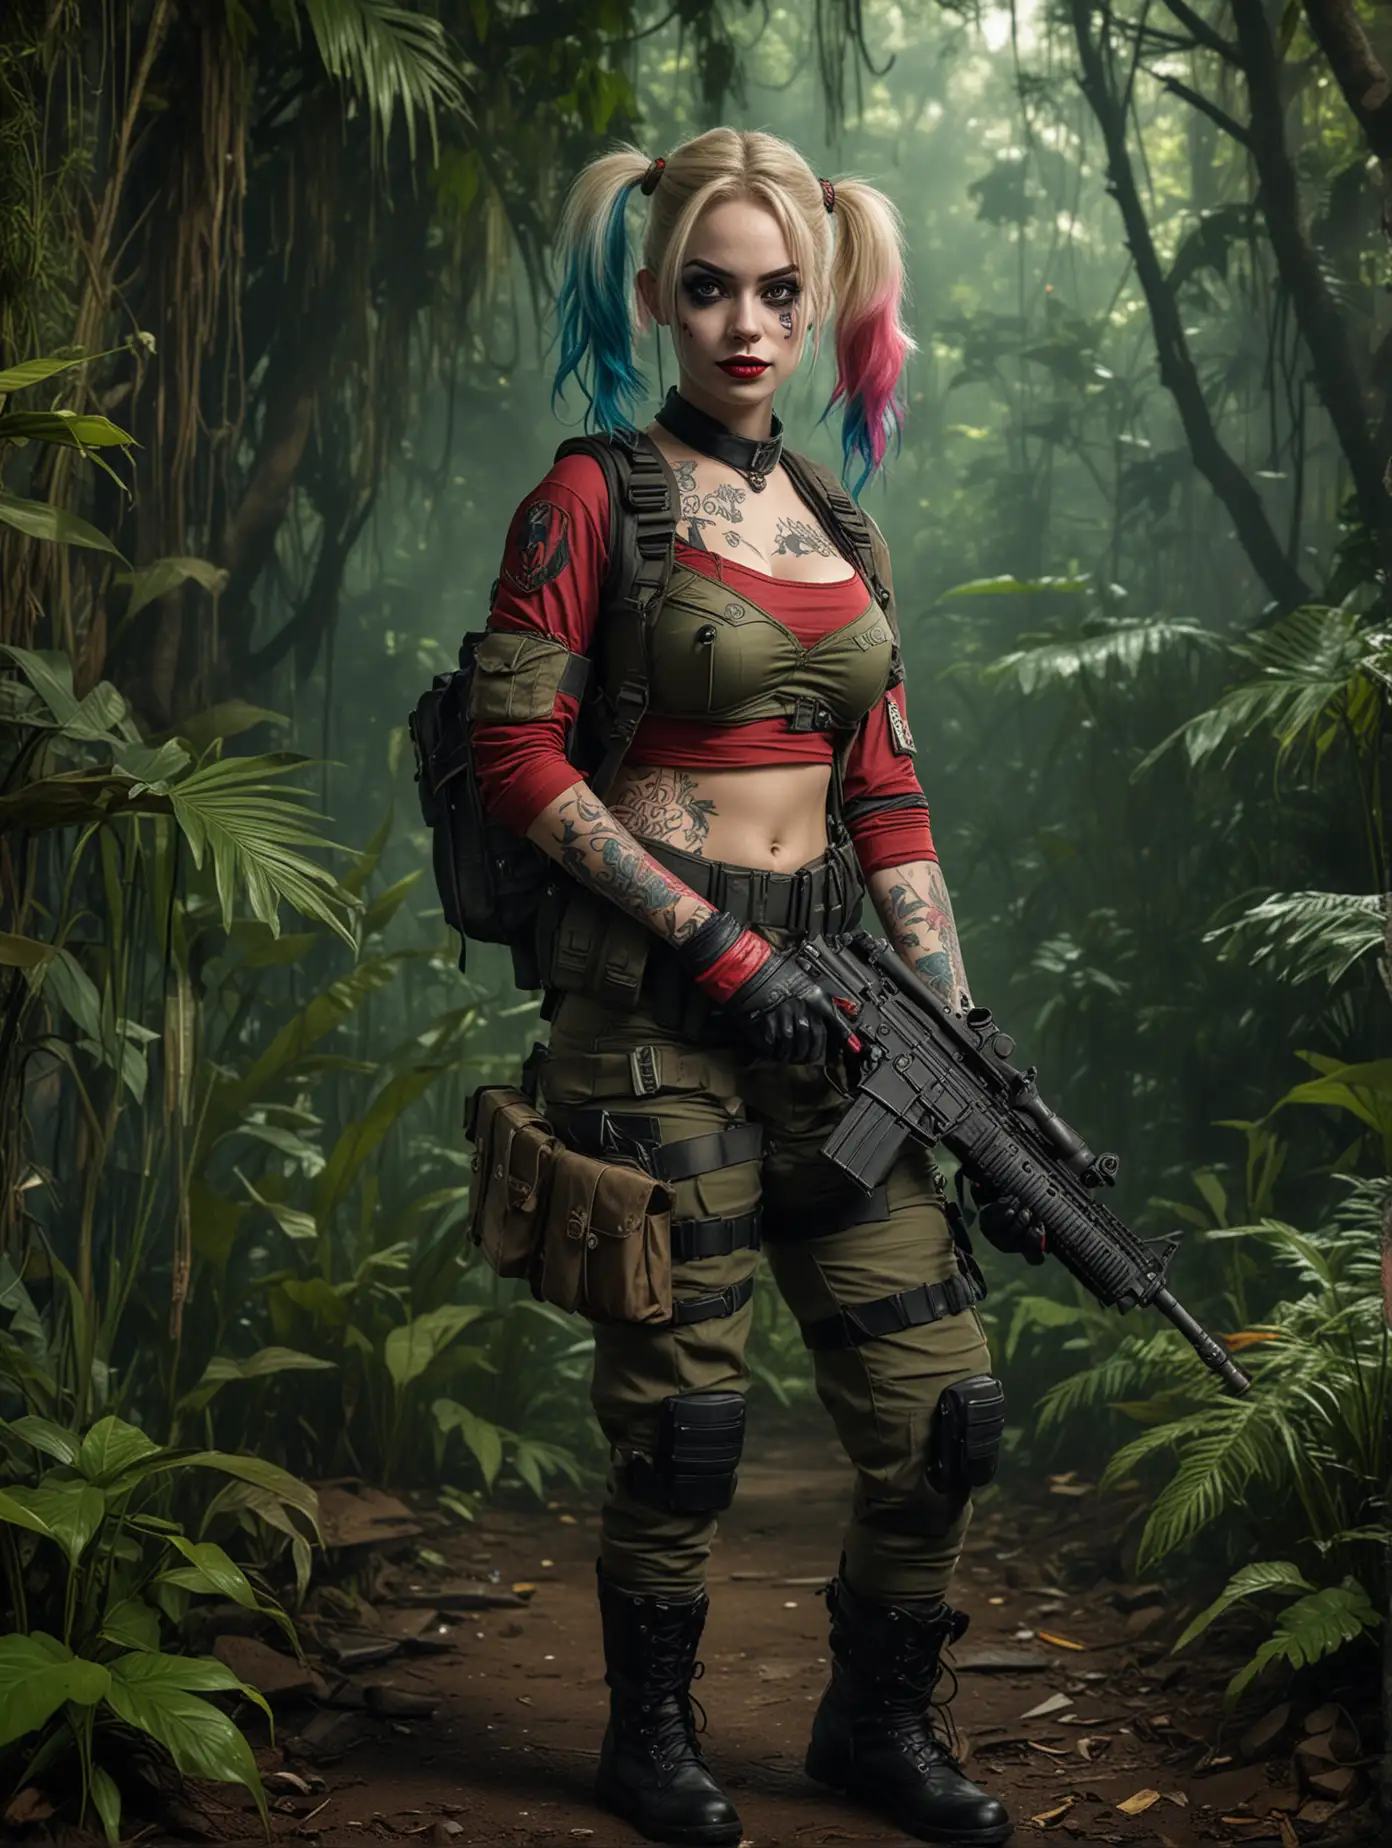 Cosplay-Army-Military-Girl-with-Machine-Gun-in-Vibrant-Jungle